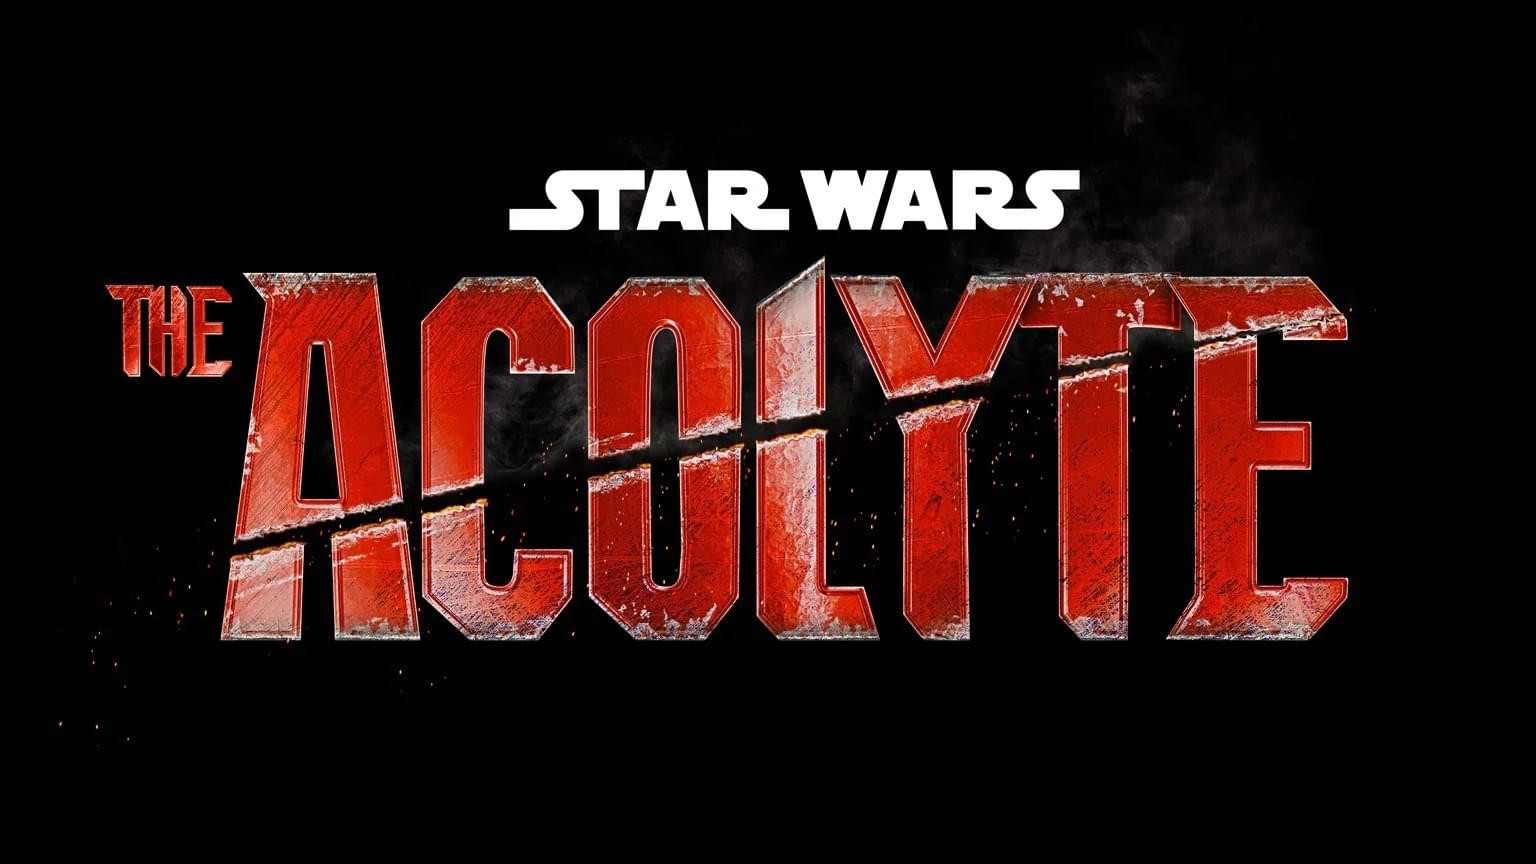 The Acolyte is a part of the next generation of Star Wars.